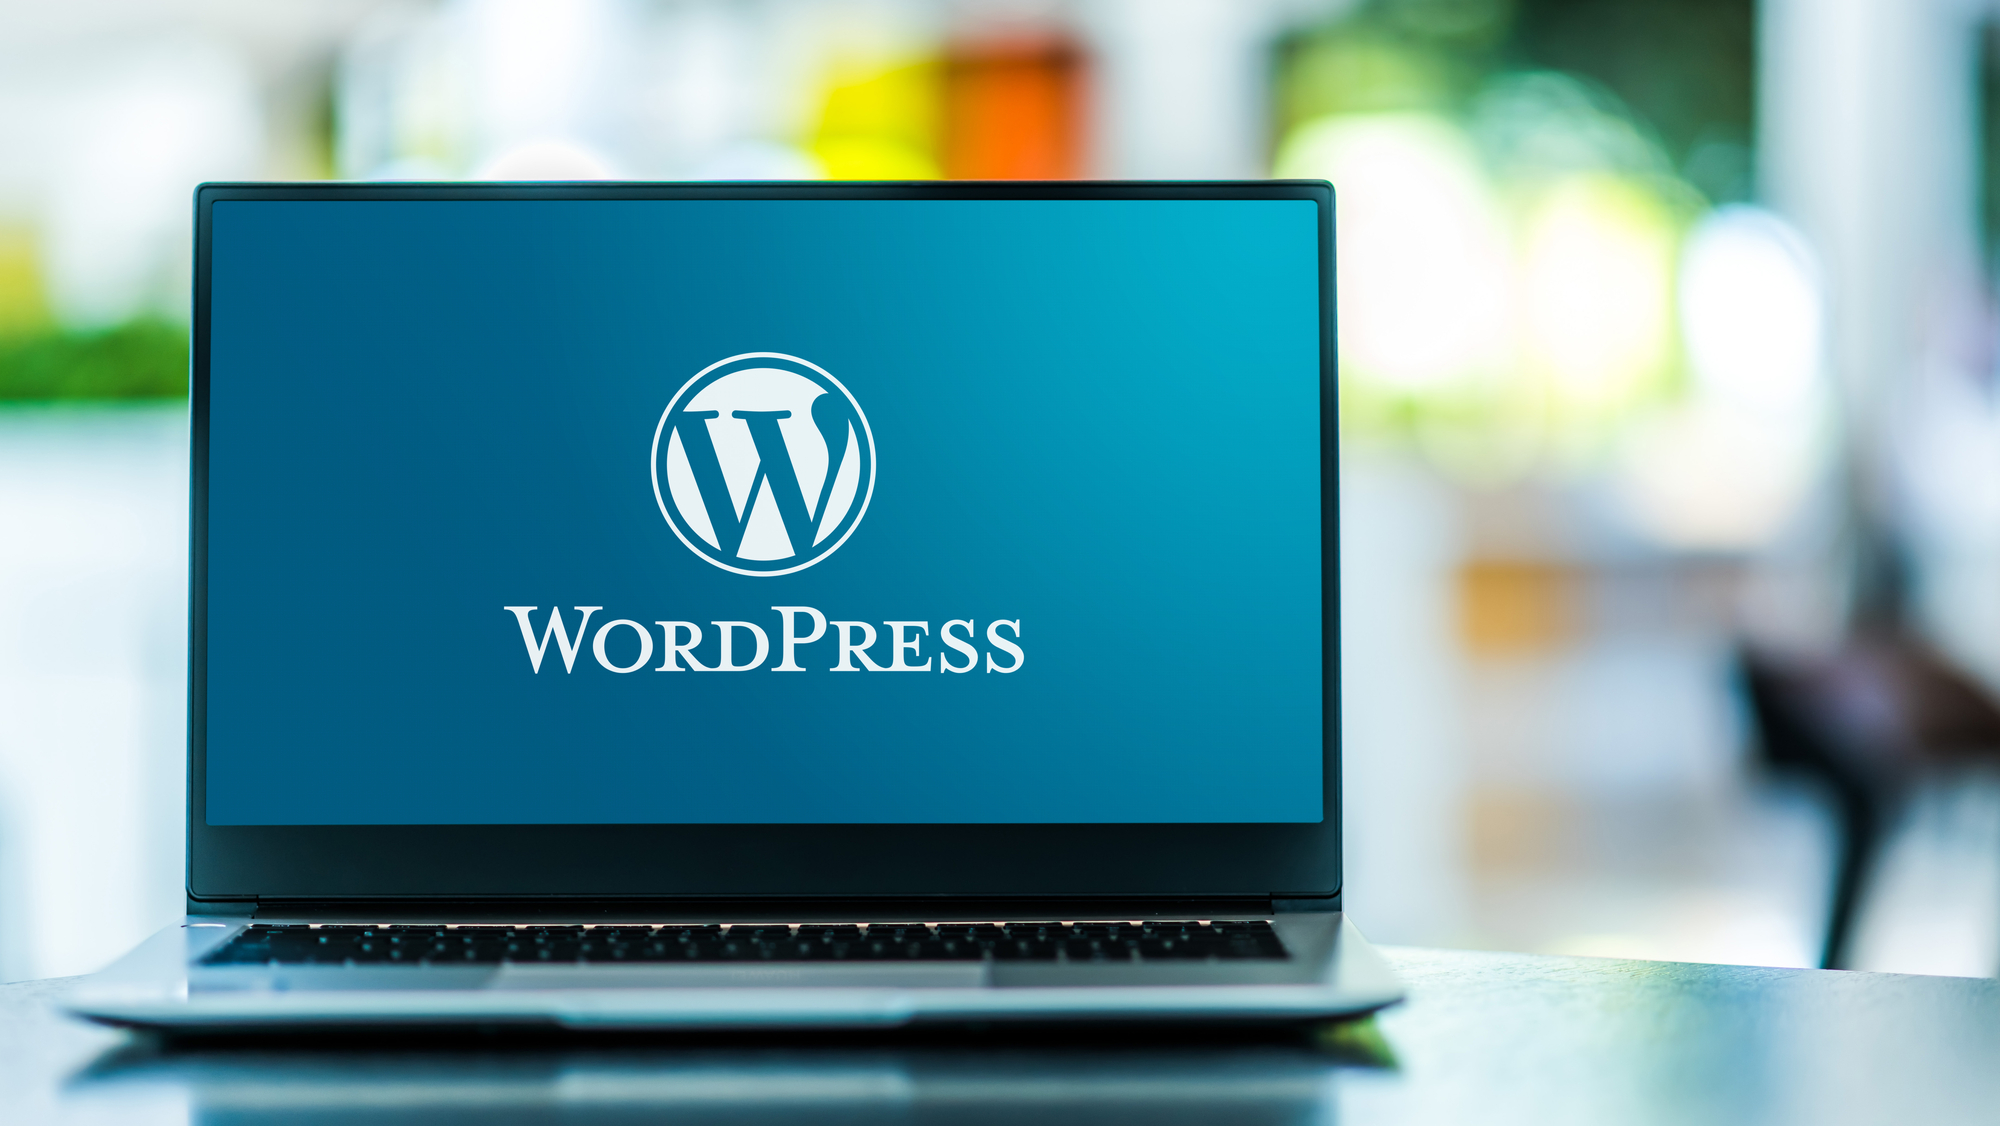 WordPress Design for Small Business